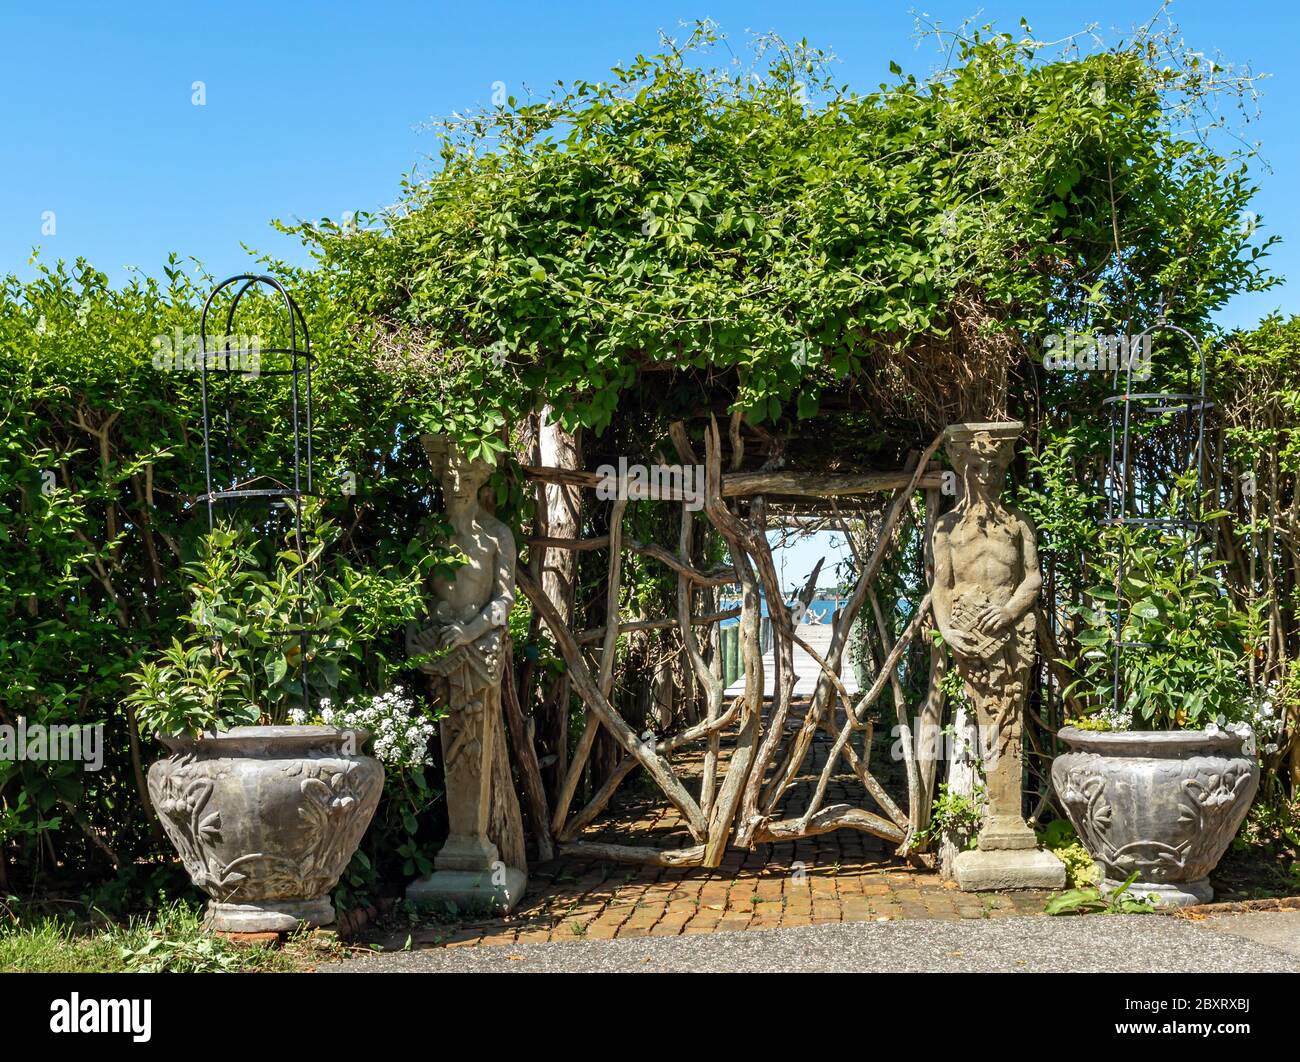 Elaborate entrance to a private dock featuring statues, urns and a hand made gate, Dering Harbor, NY Stock Photo